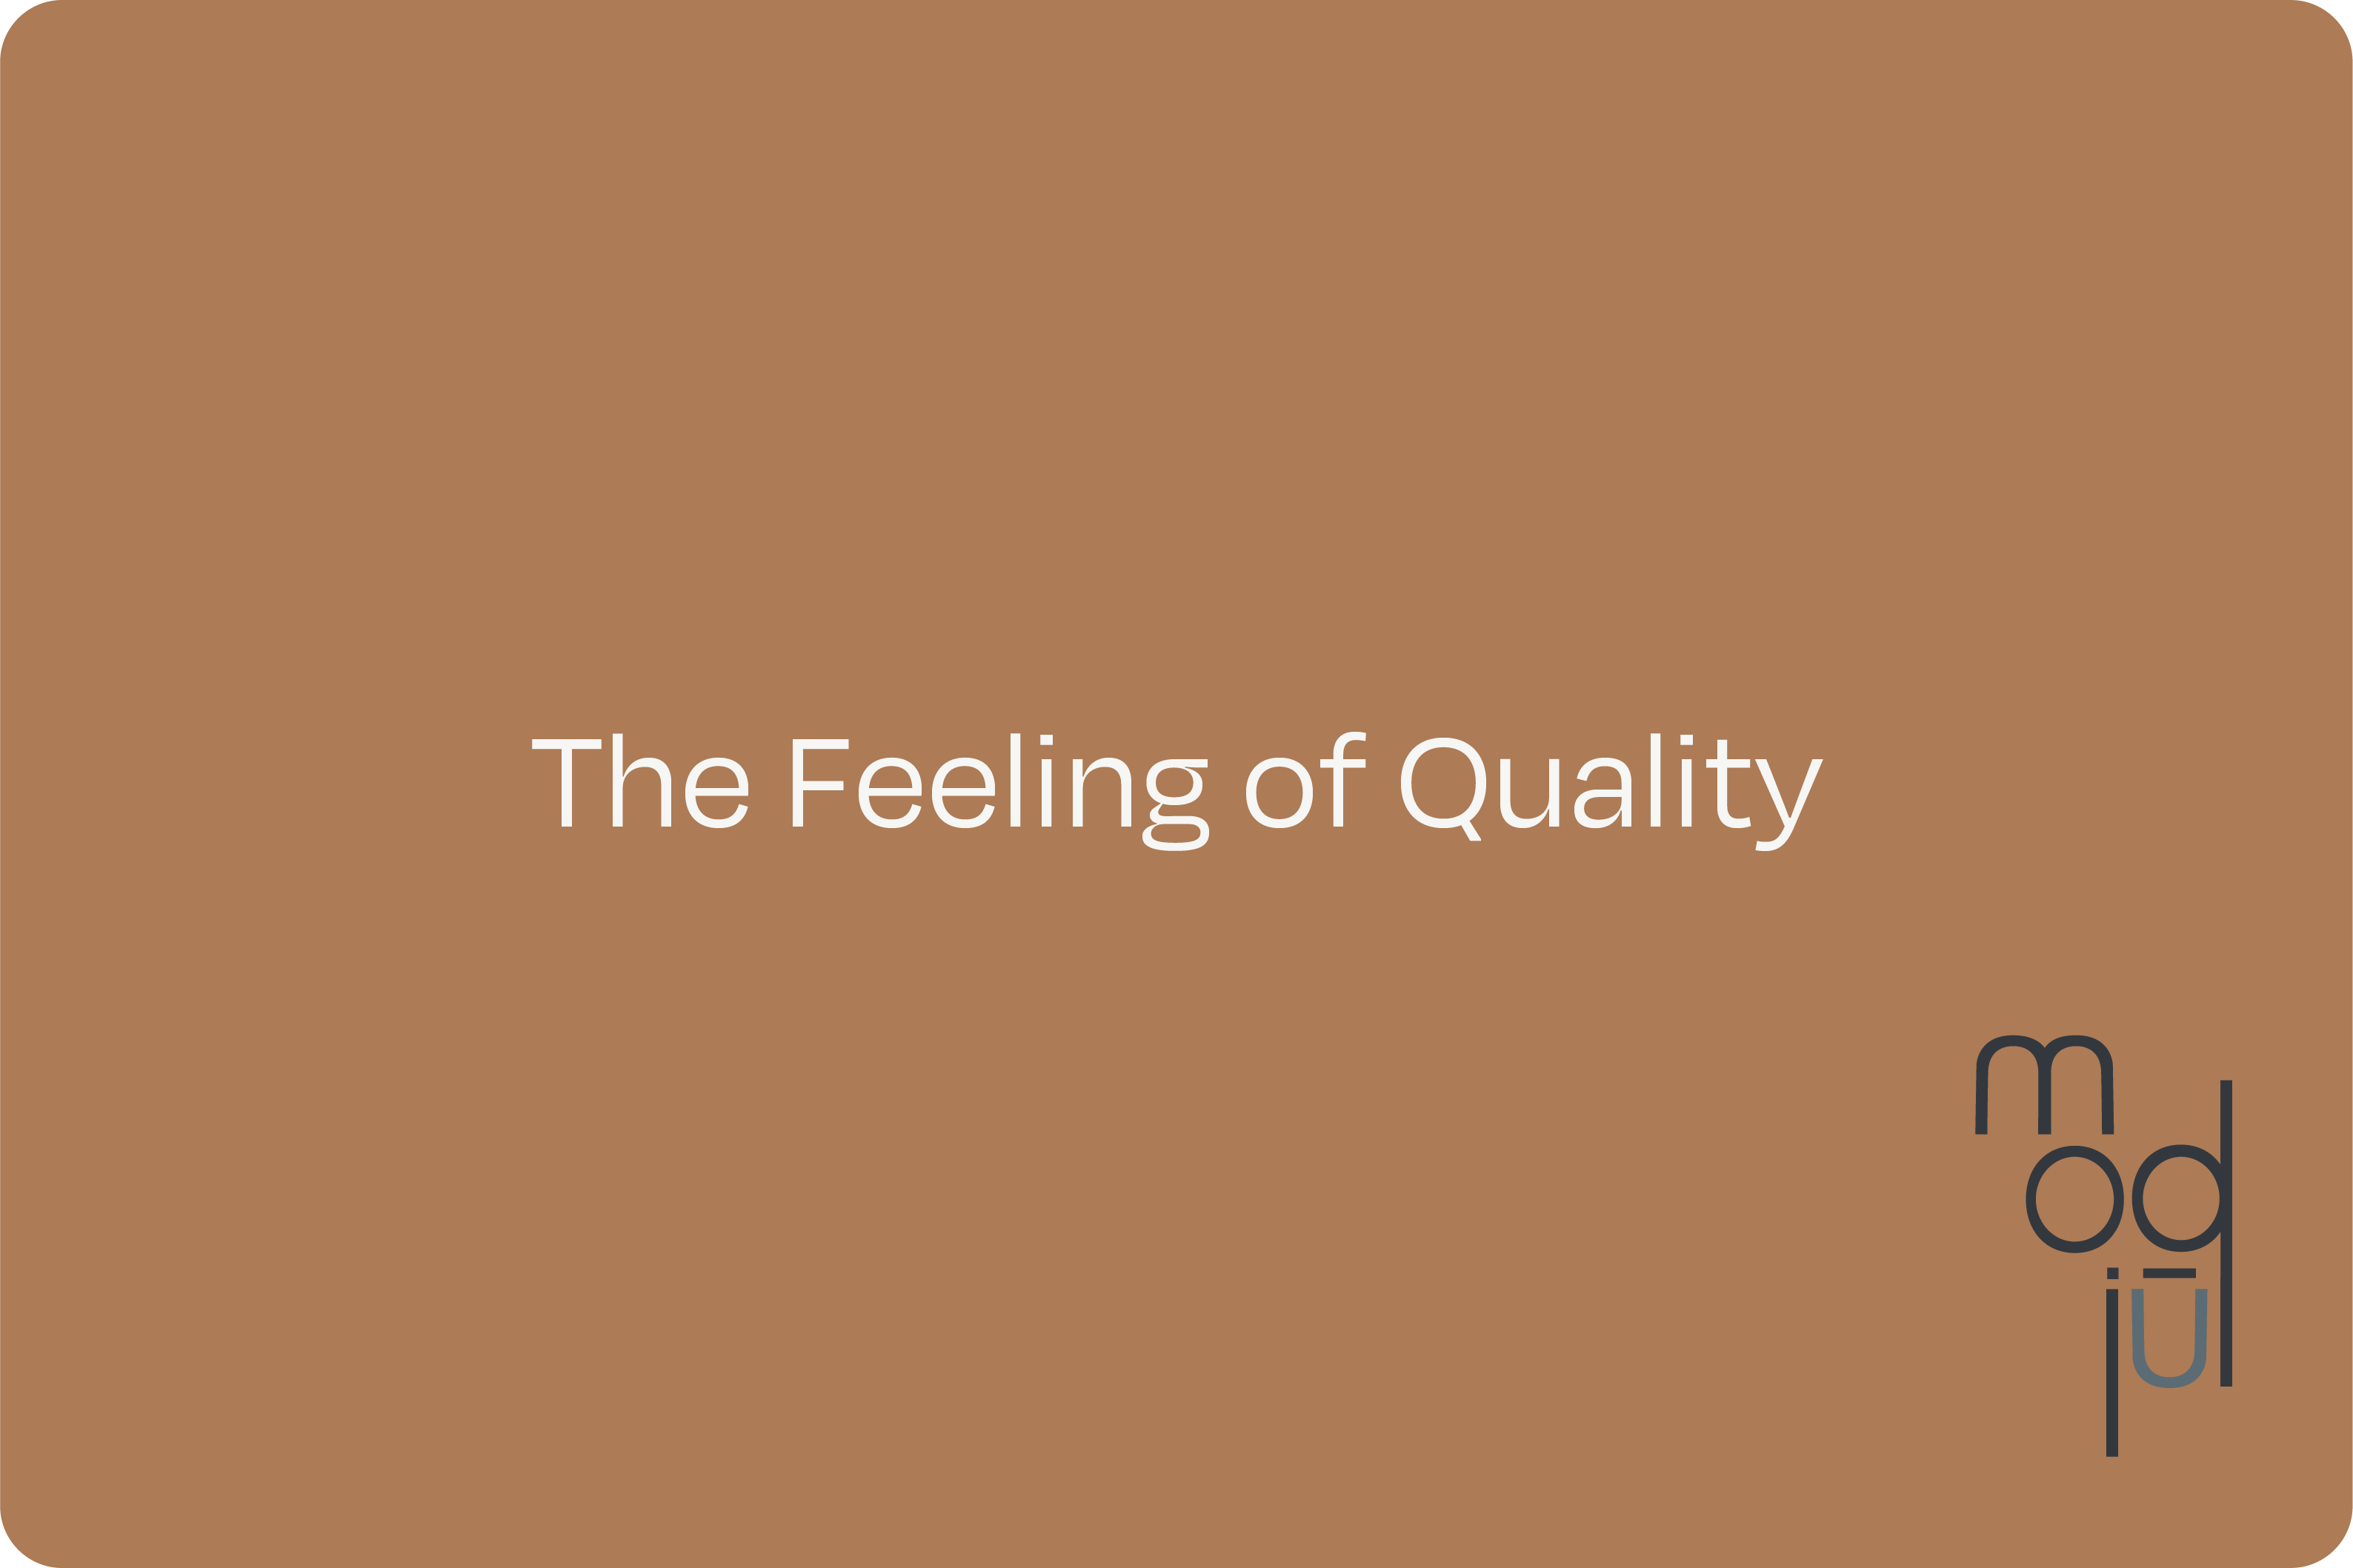 A brown virtual modjūl gift card that says "the feeling of quality".